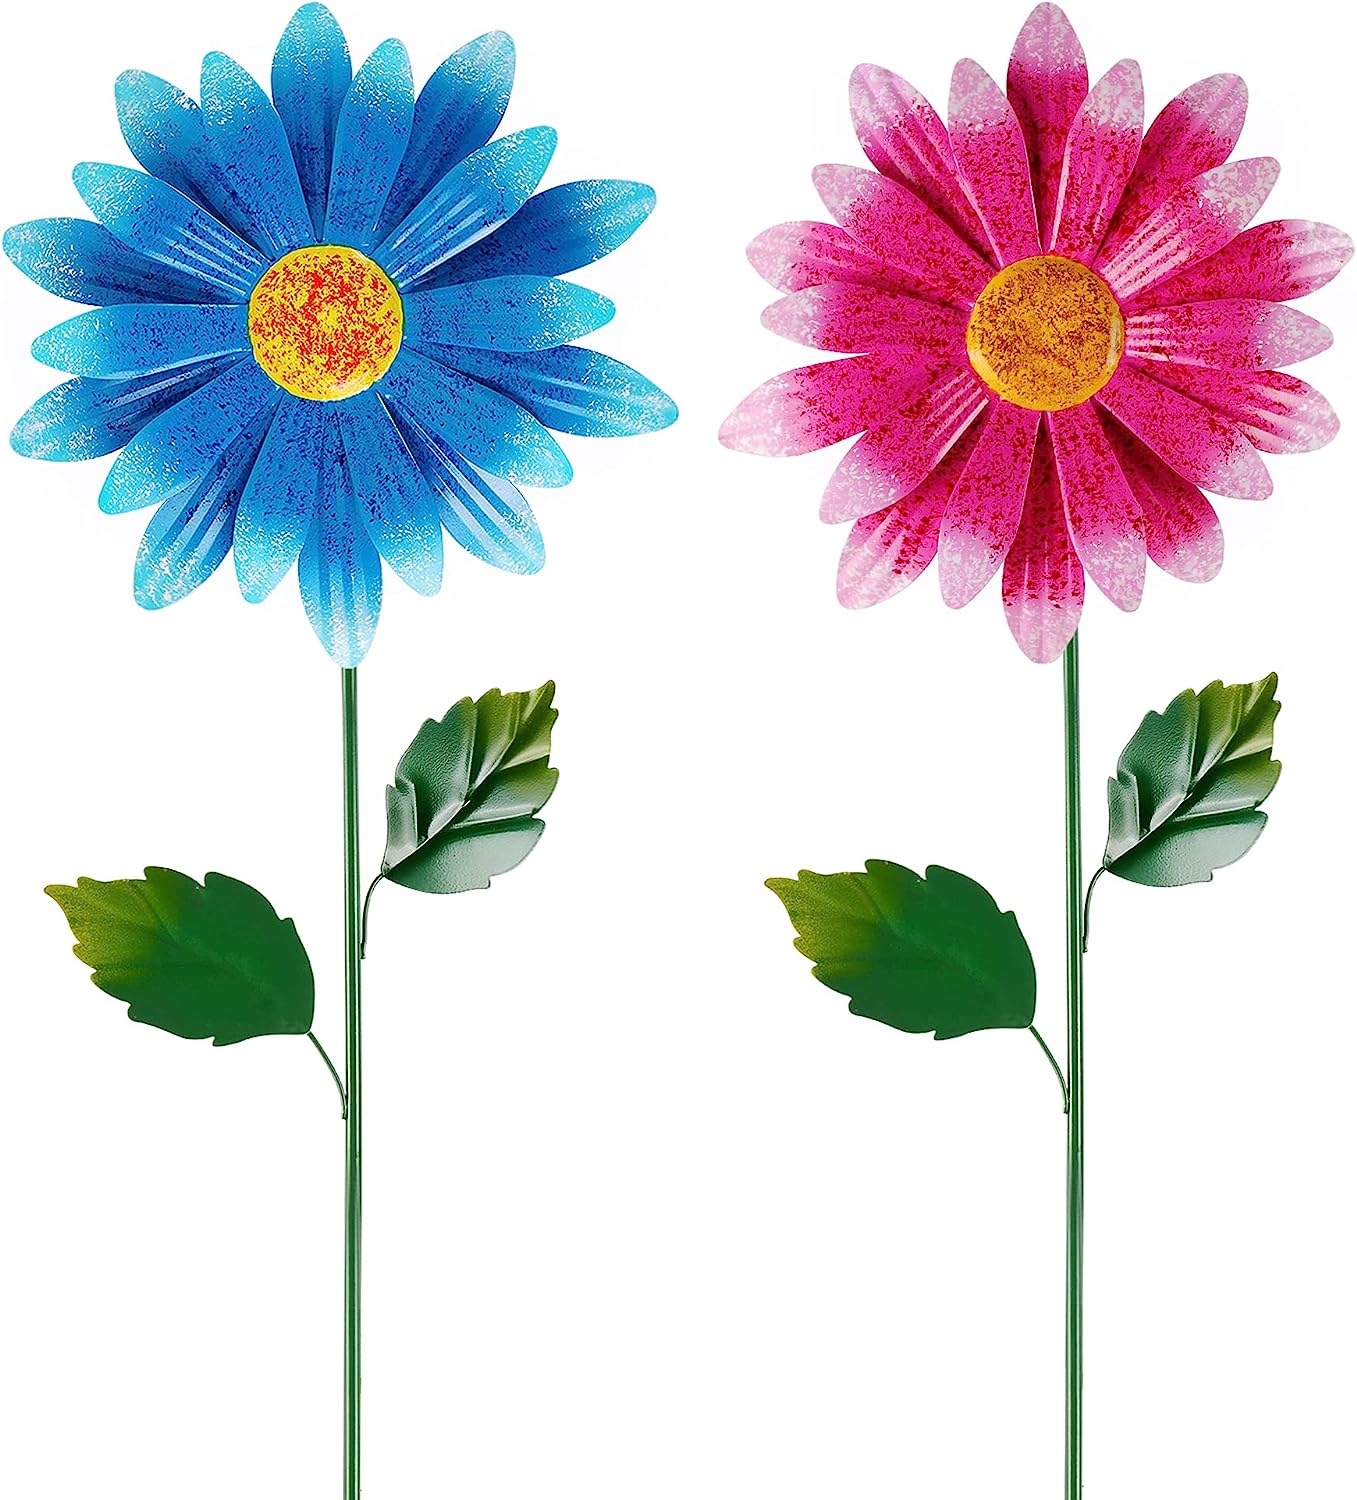 2 Pack Flower Garden Stakes Decor, 35 Inch Outdoor Large Metal Colorful Sunflowers Daisy Yard Art, Rust Proof Metal Plant Sticks, Indoor Outdoor Fall Lawn Pathway Patio Art Decorations